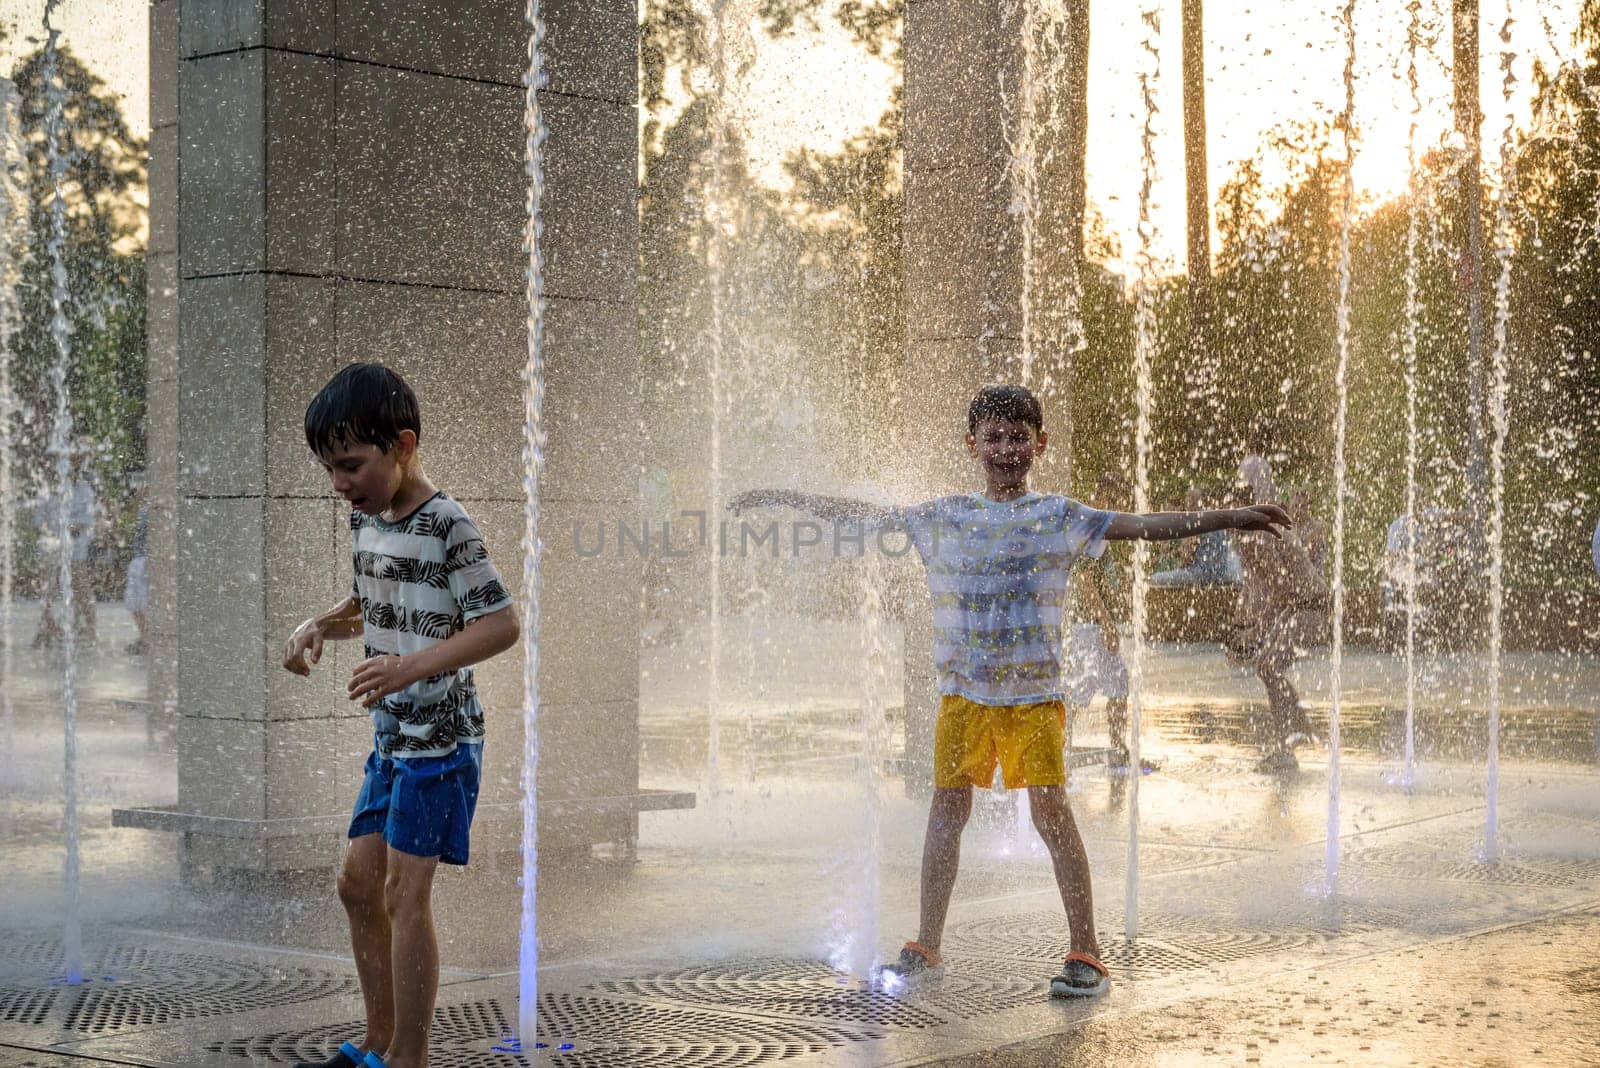 Boys jumping in water fountains. Children playing with a city fountain on hot summer day. Happy friends having fun in fountain. Summer weather. Friendship, lifestyle and vacation by Kobysh